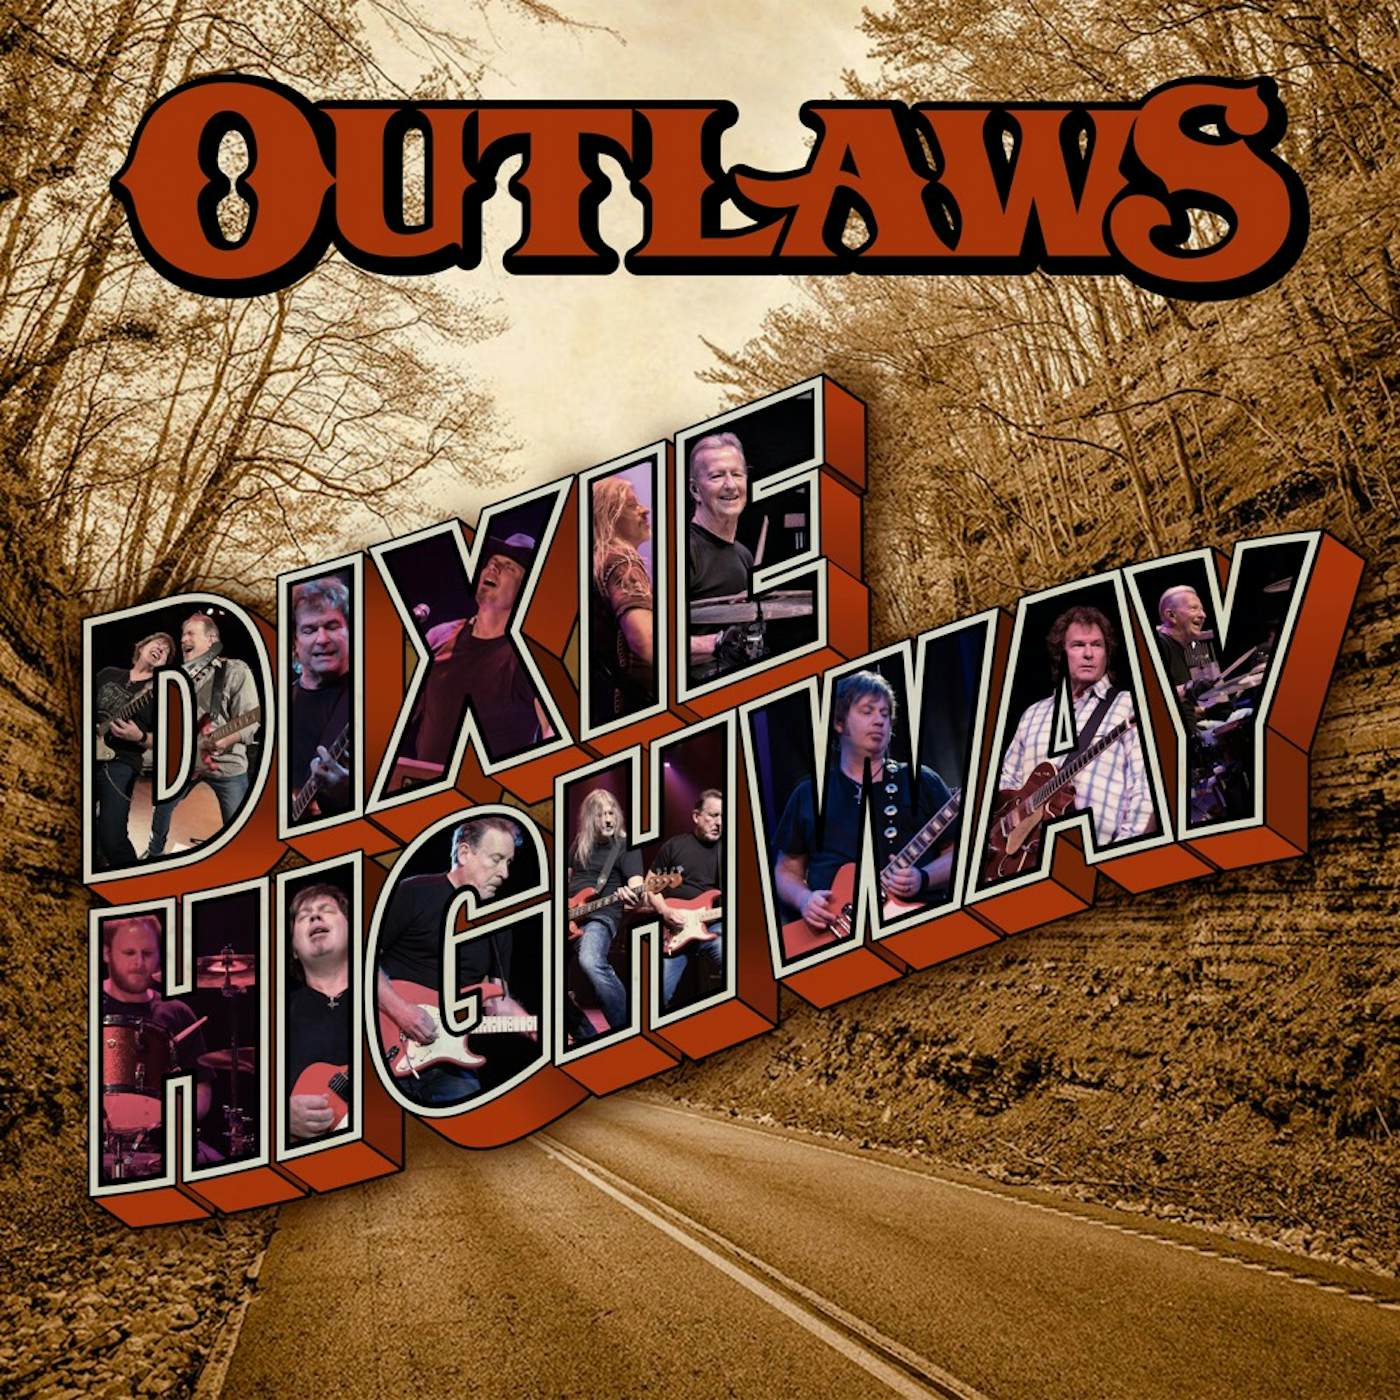 Outlaws DIXIE HIGHWAY CD